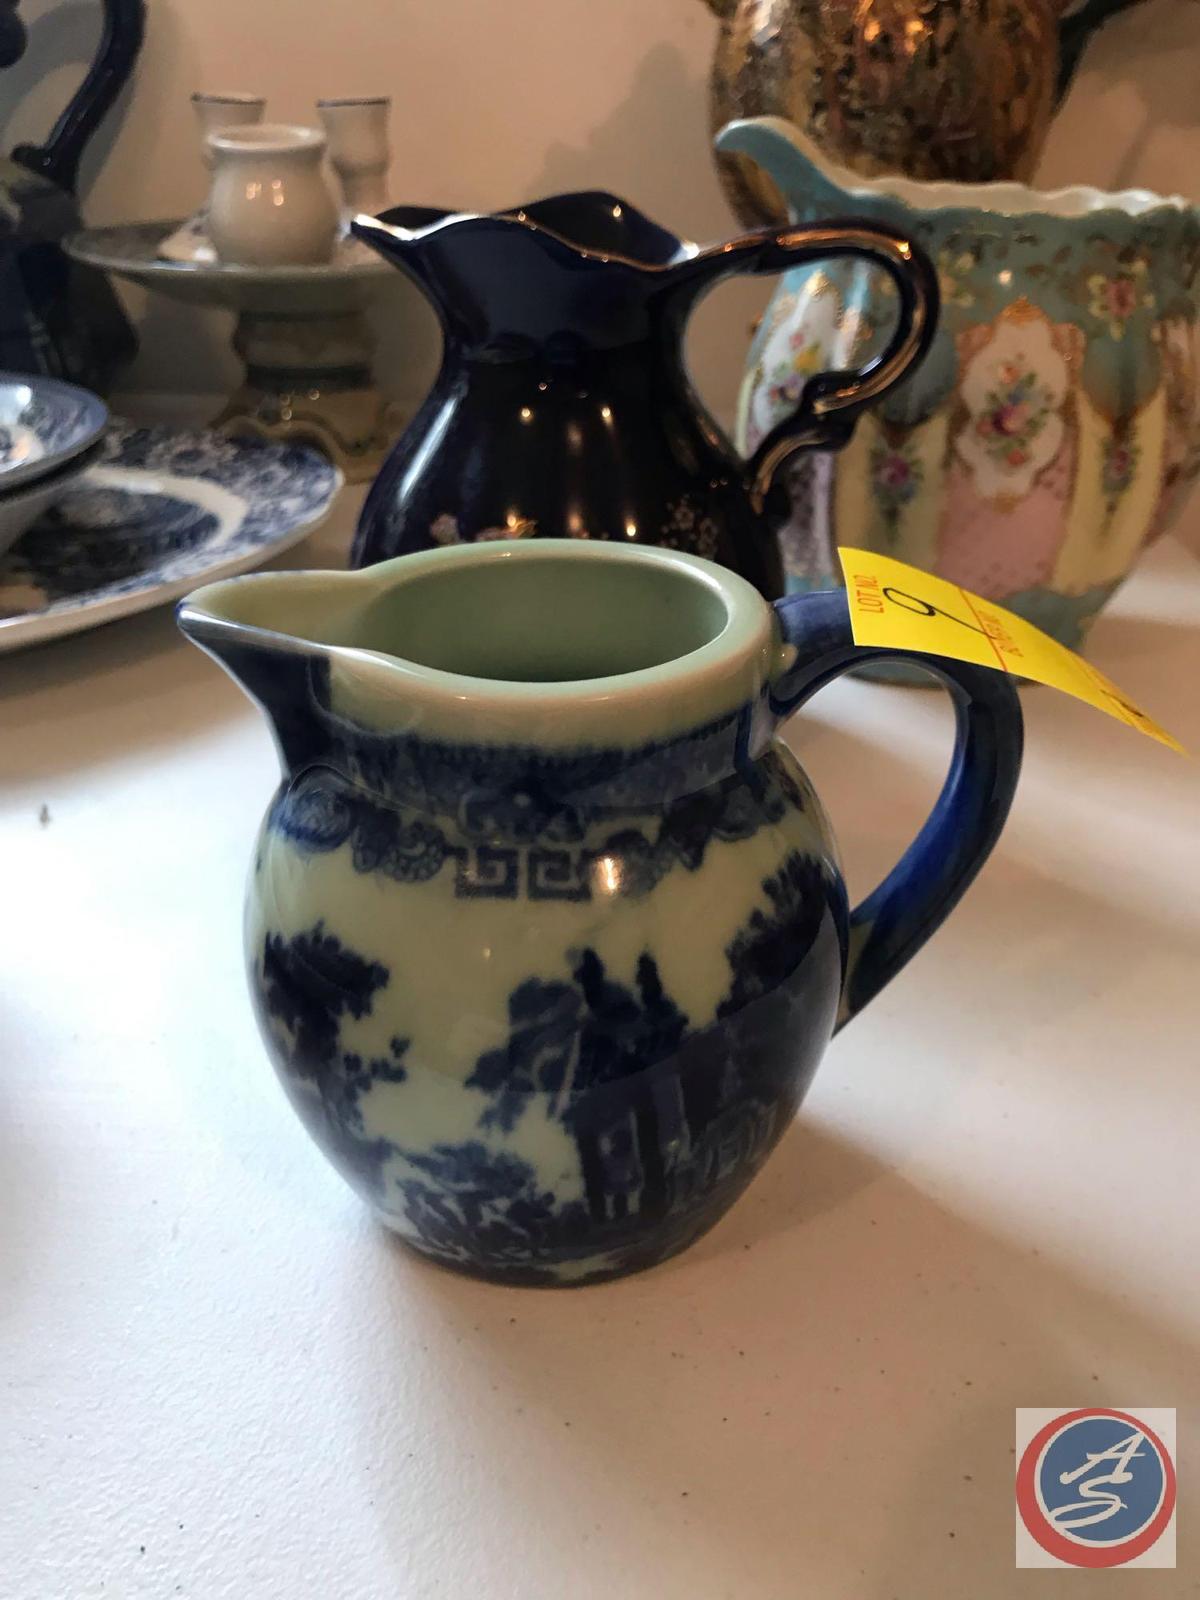 (4) Pitchers Including a Vintage Floral Pitcher, Dark Blue Pitcher, Water Pitcher, and Cream Pitcher